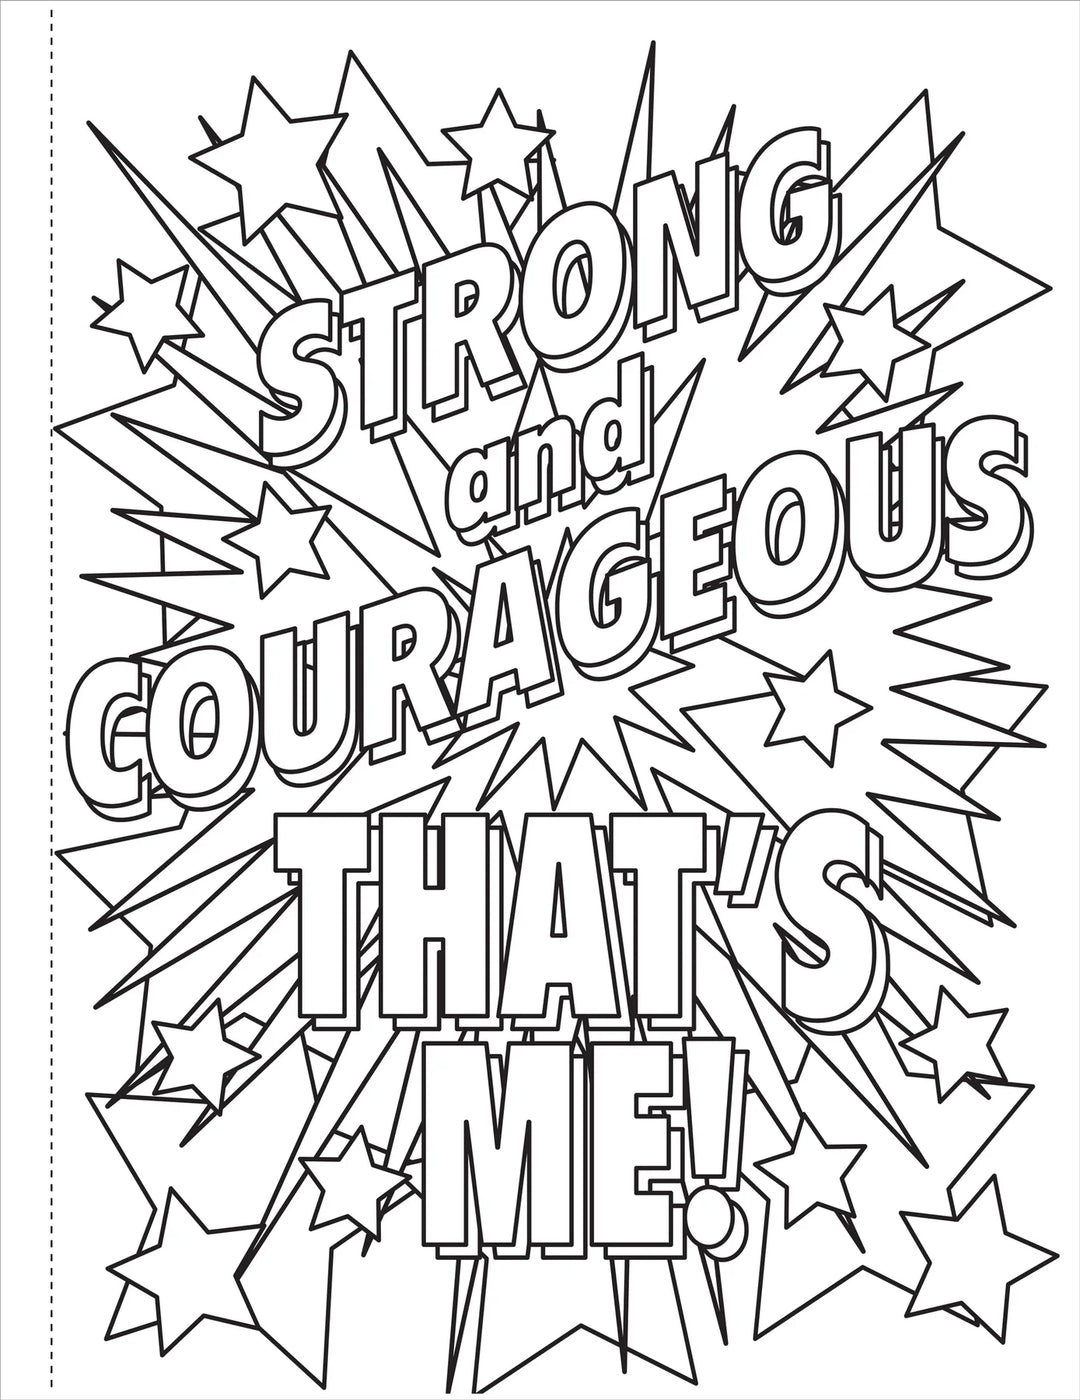 Colouring Book - Brave, Strong and Smart, That’s Me!